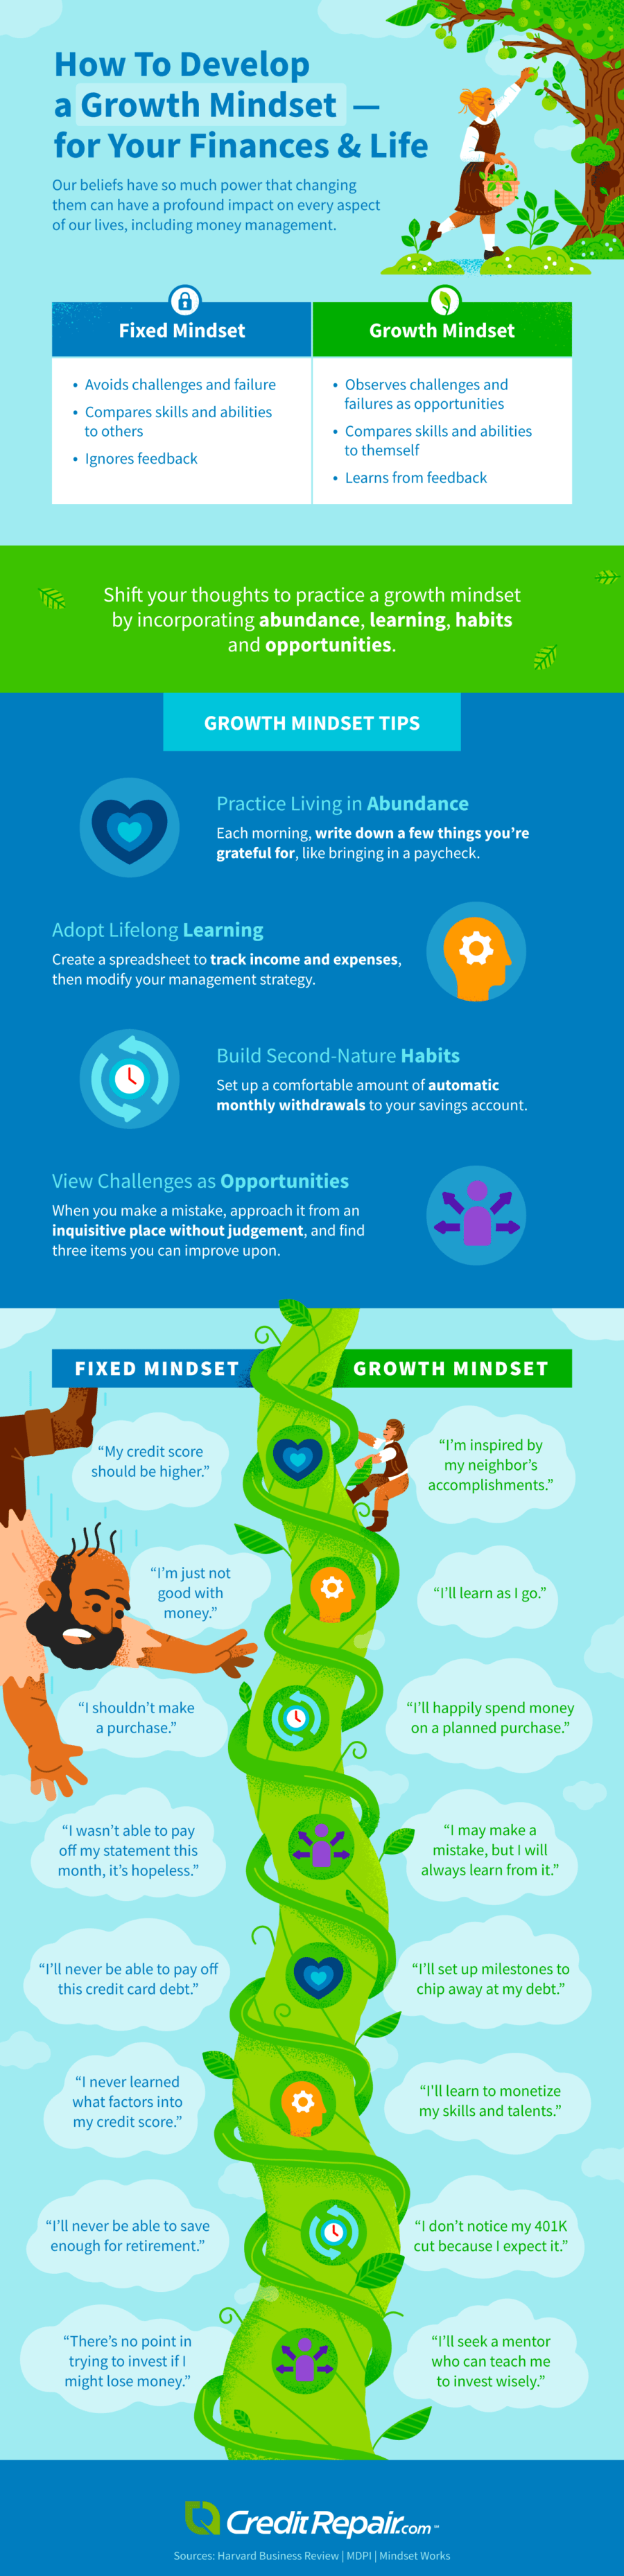 Growth Mindset Infographic The Inspiring Journal 